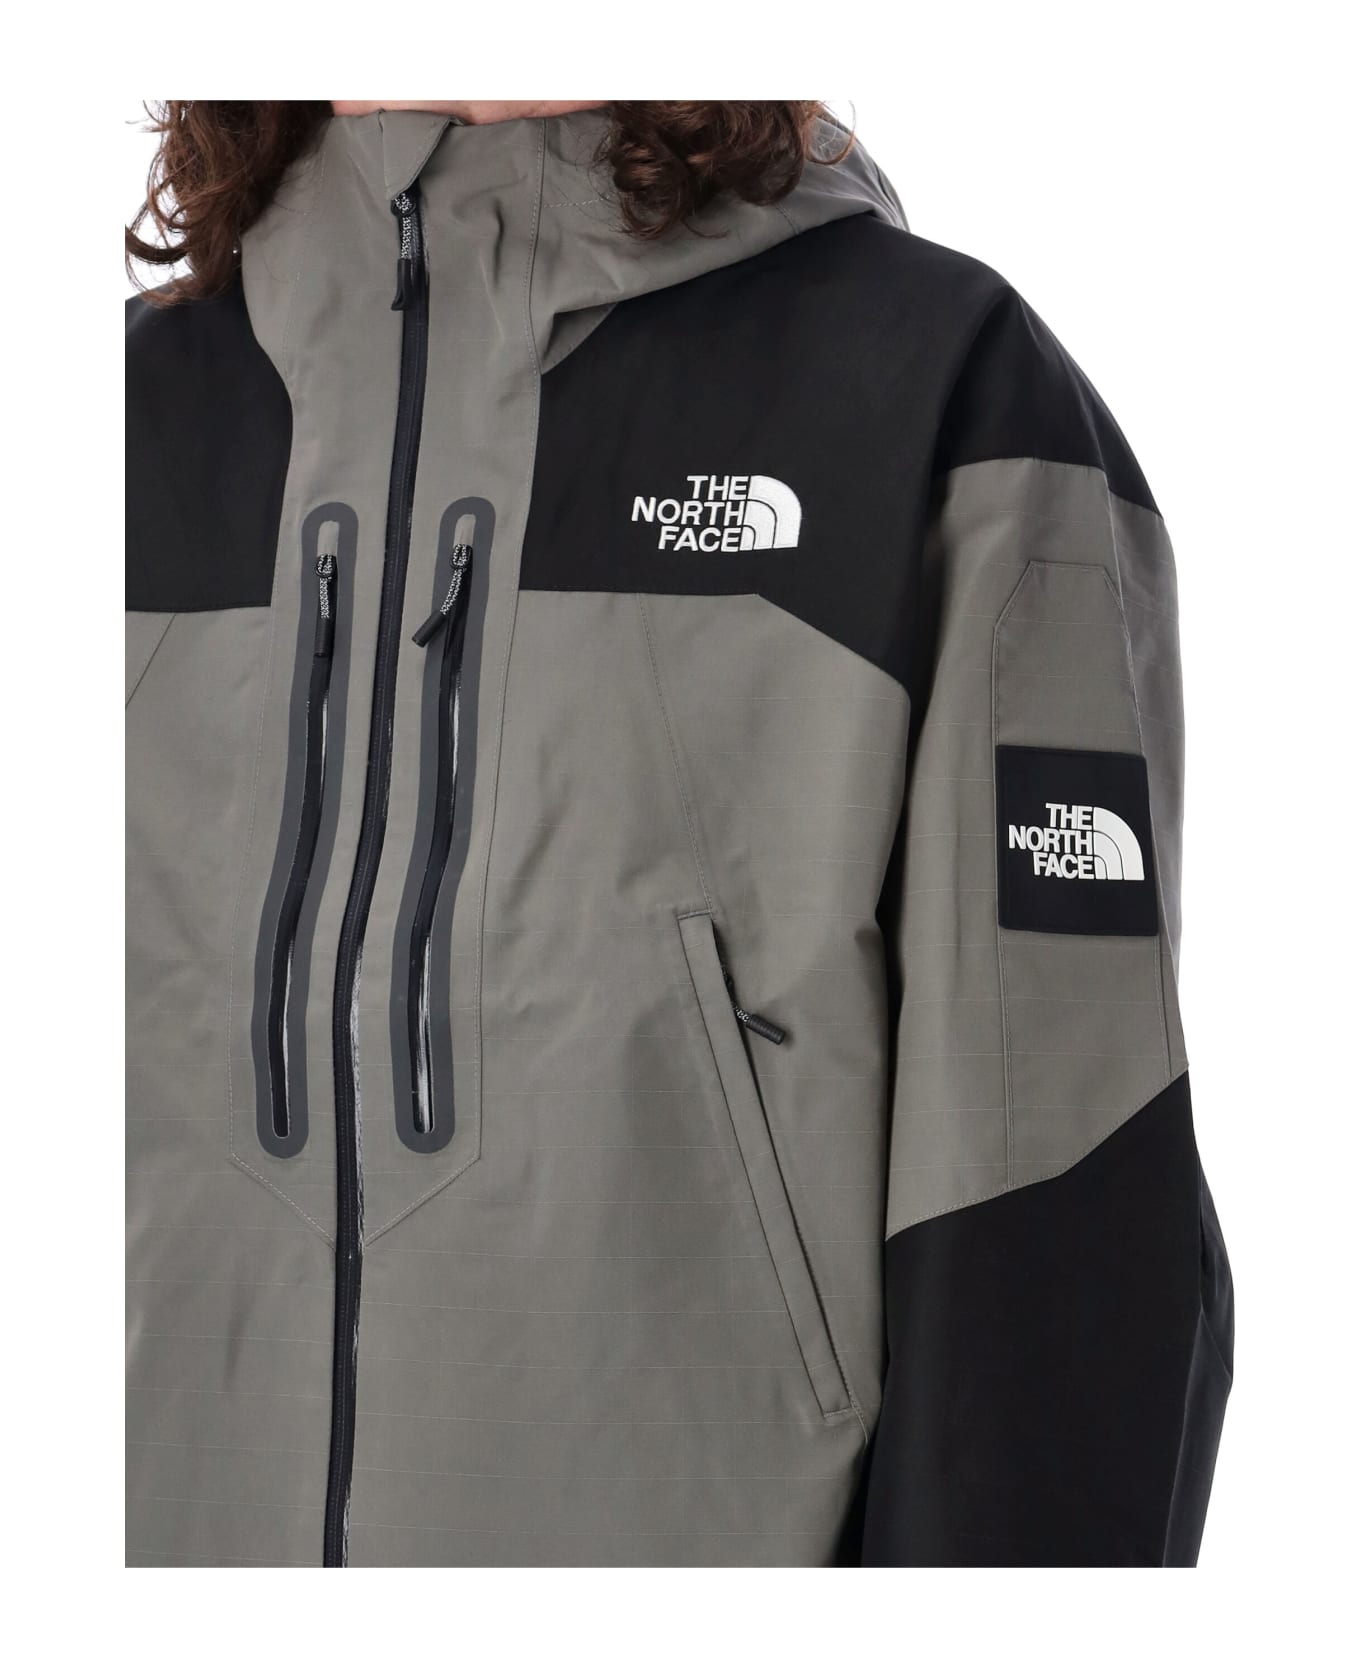 The North Face Trasverse 2l Dryvent Jacket - GREY ブレザー